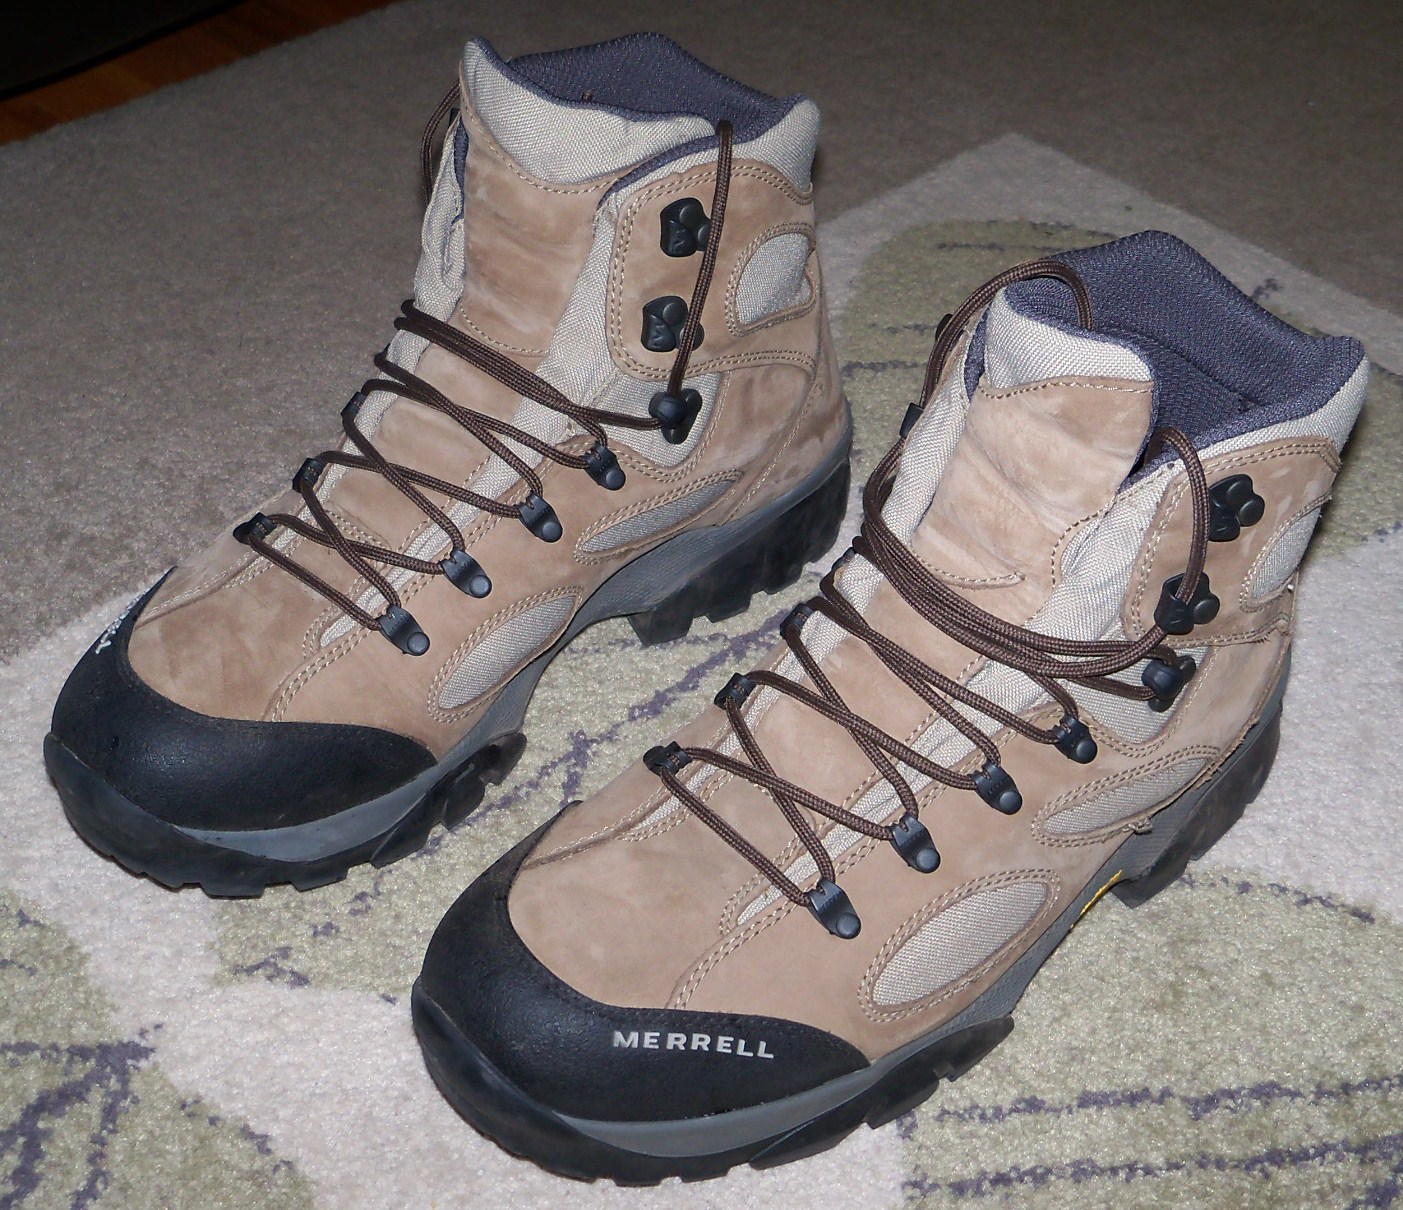 Survival of the Fittest: Merrell Sawtooth Mid Weight Hiking Boot Review